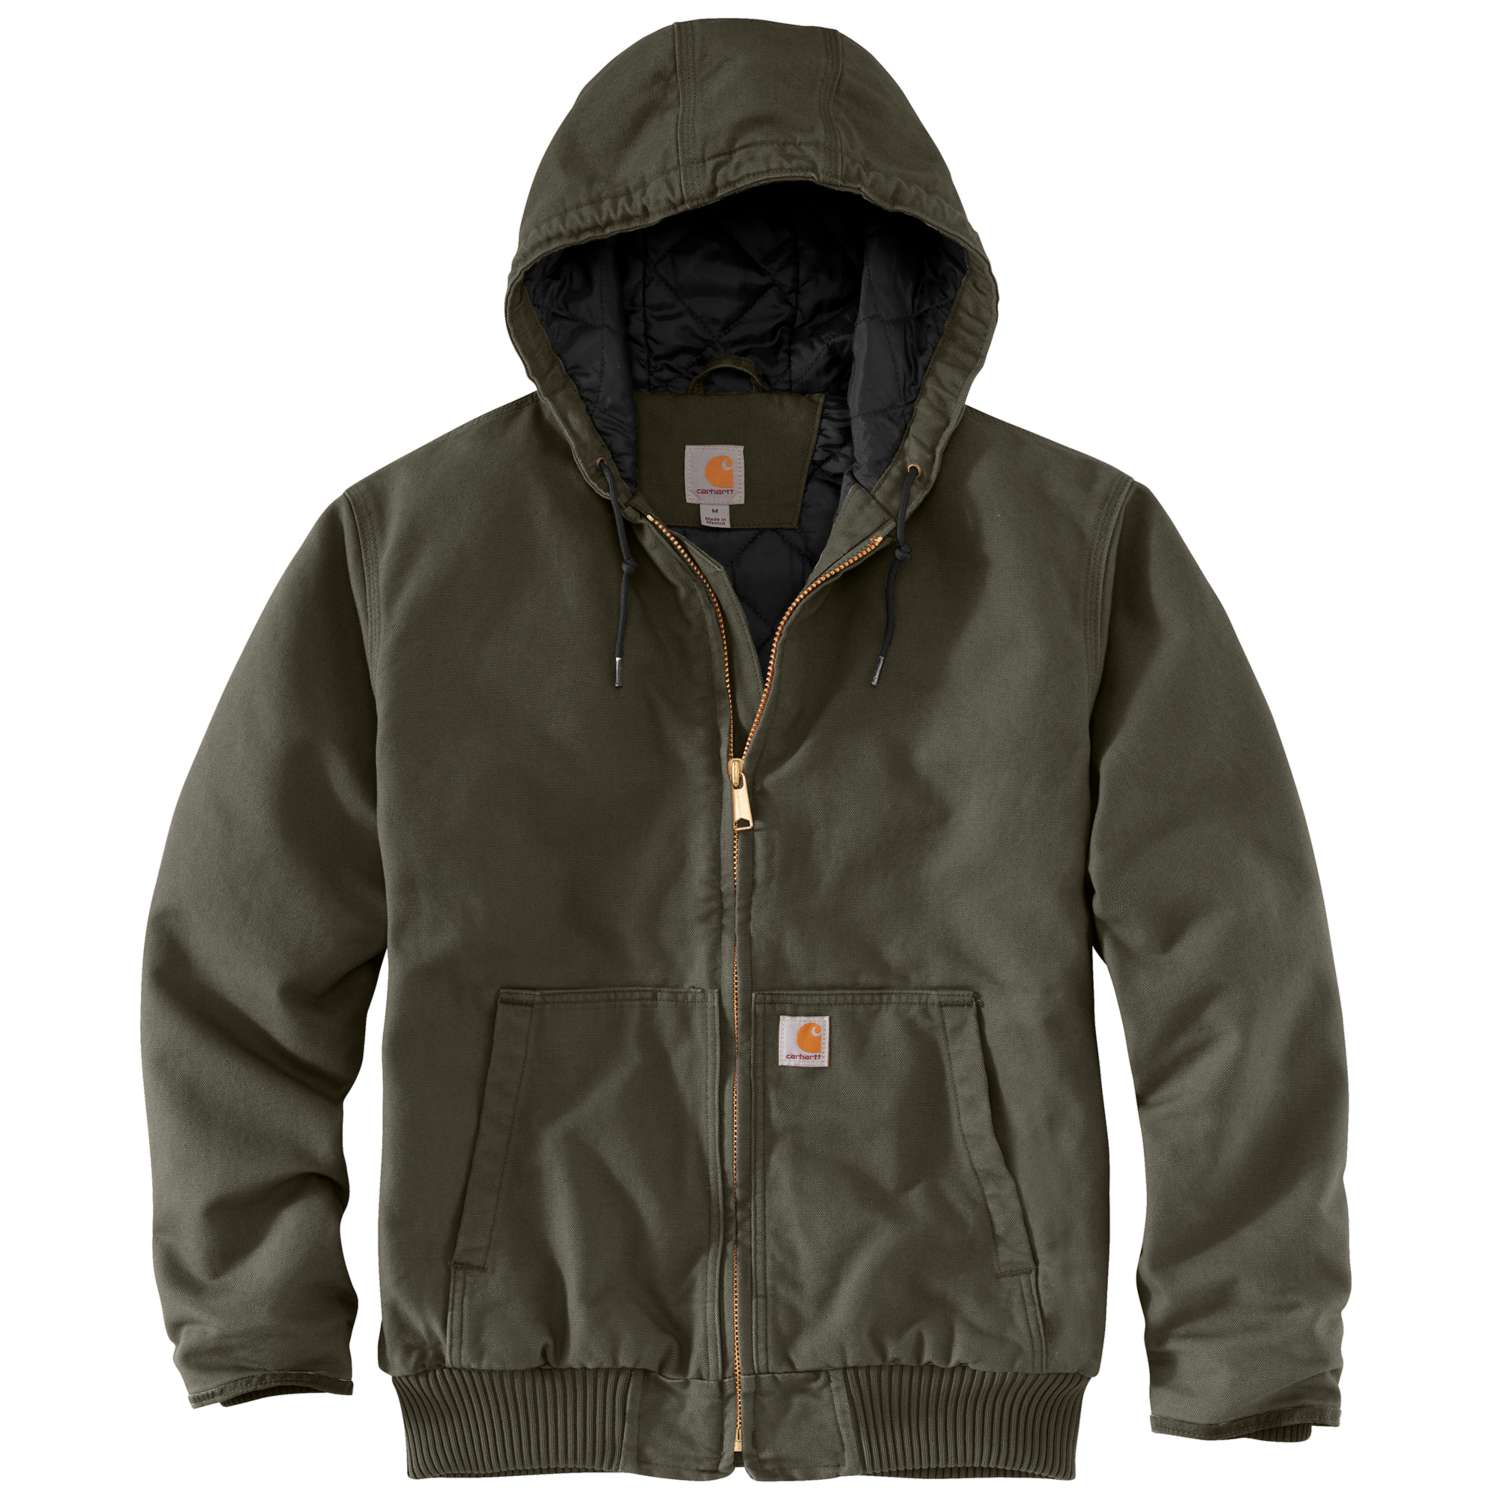 Carhartt Men's Washed Duck Insulated Work Jacket 104050